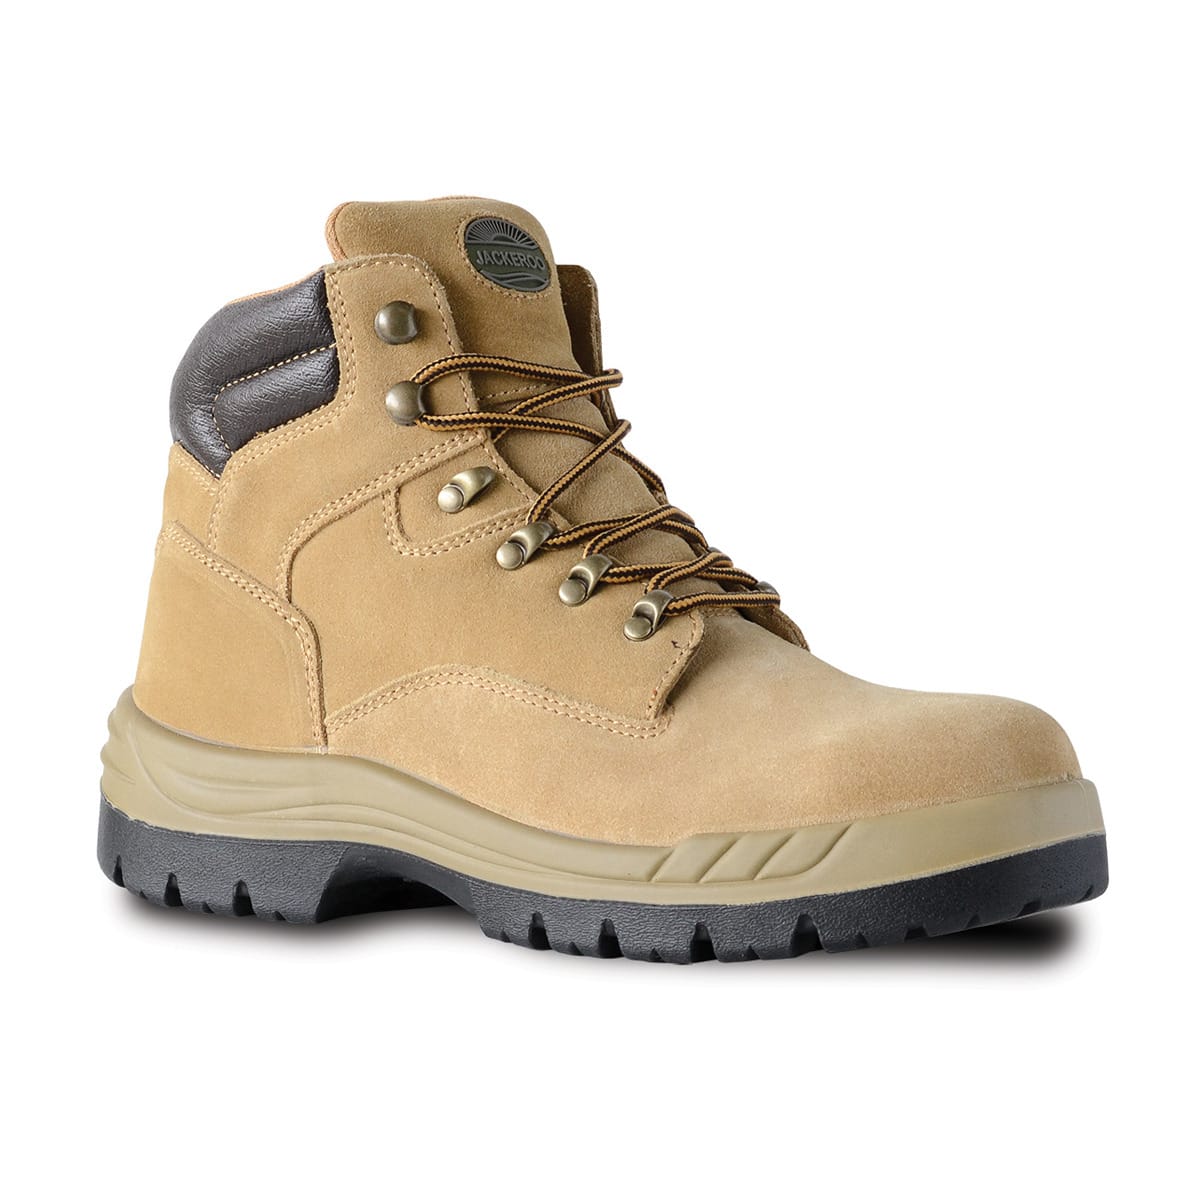 Raider Lace Up Work Boots - Kmart